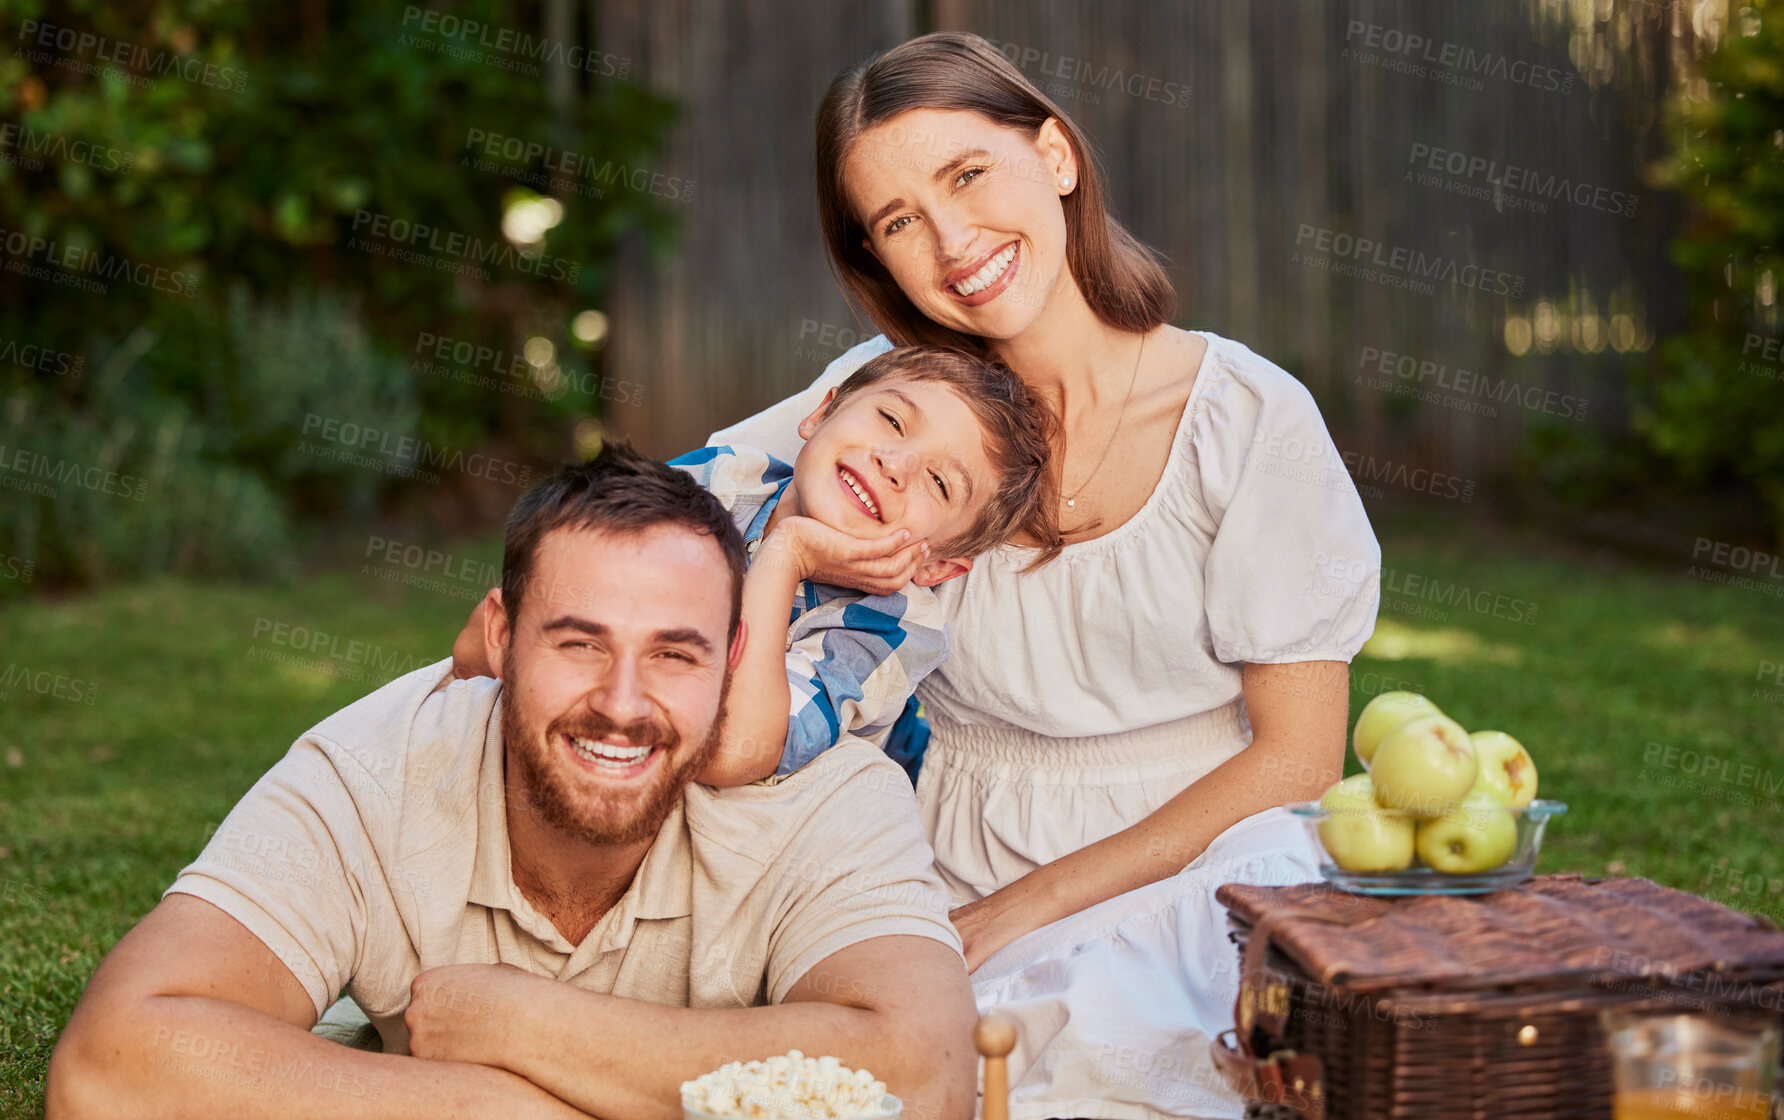 Buy stock photo A happy family with a child having a picnic in the garden. Portrait of a smiling, cute little boy with his parents relaxing in the backyard. A mother and father having fun with their son on the grass